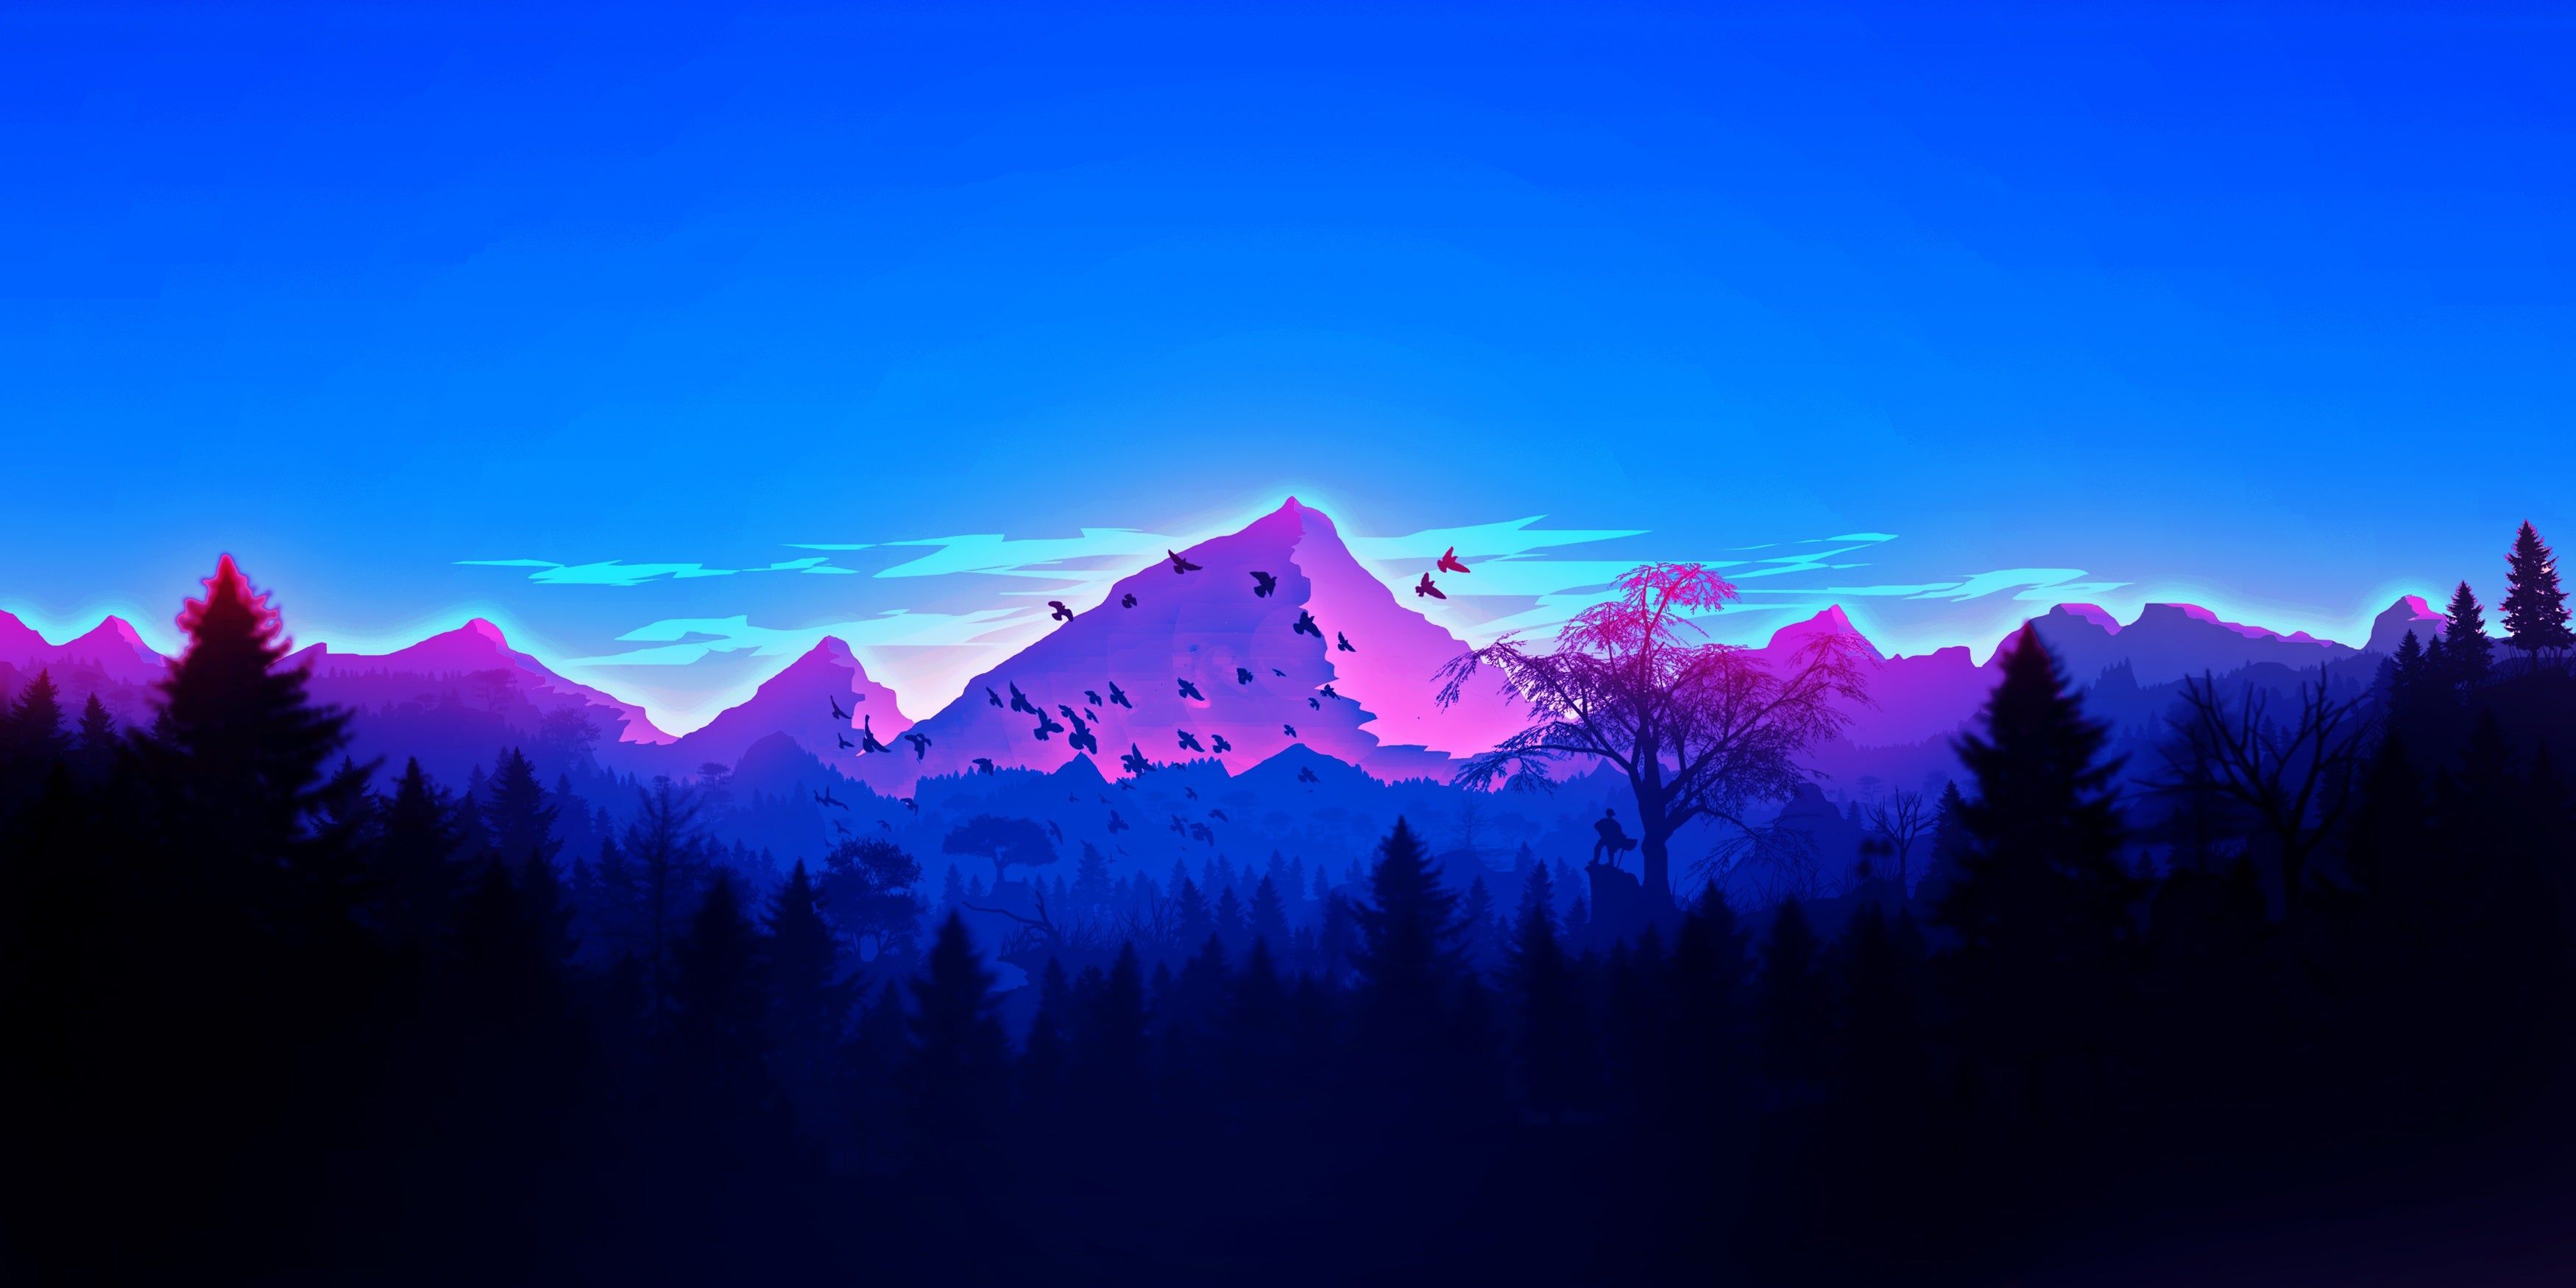 Mountain 4K wallpaper for your desktop or mobile screen free and easy to download